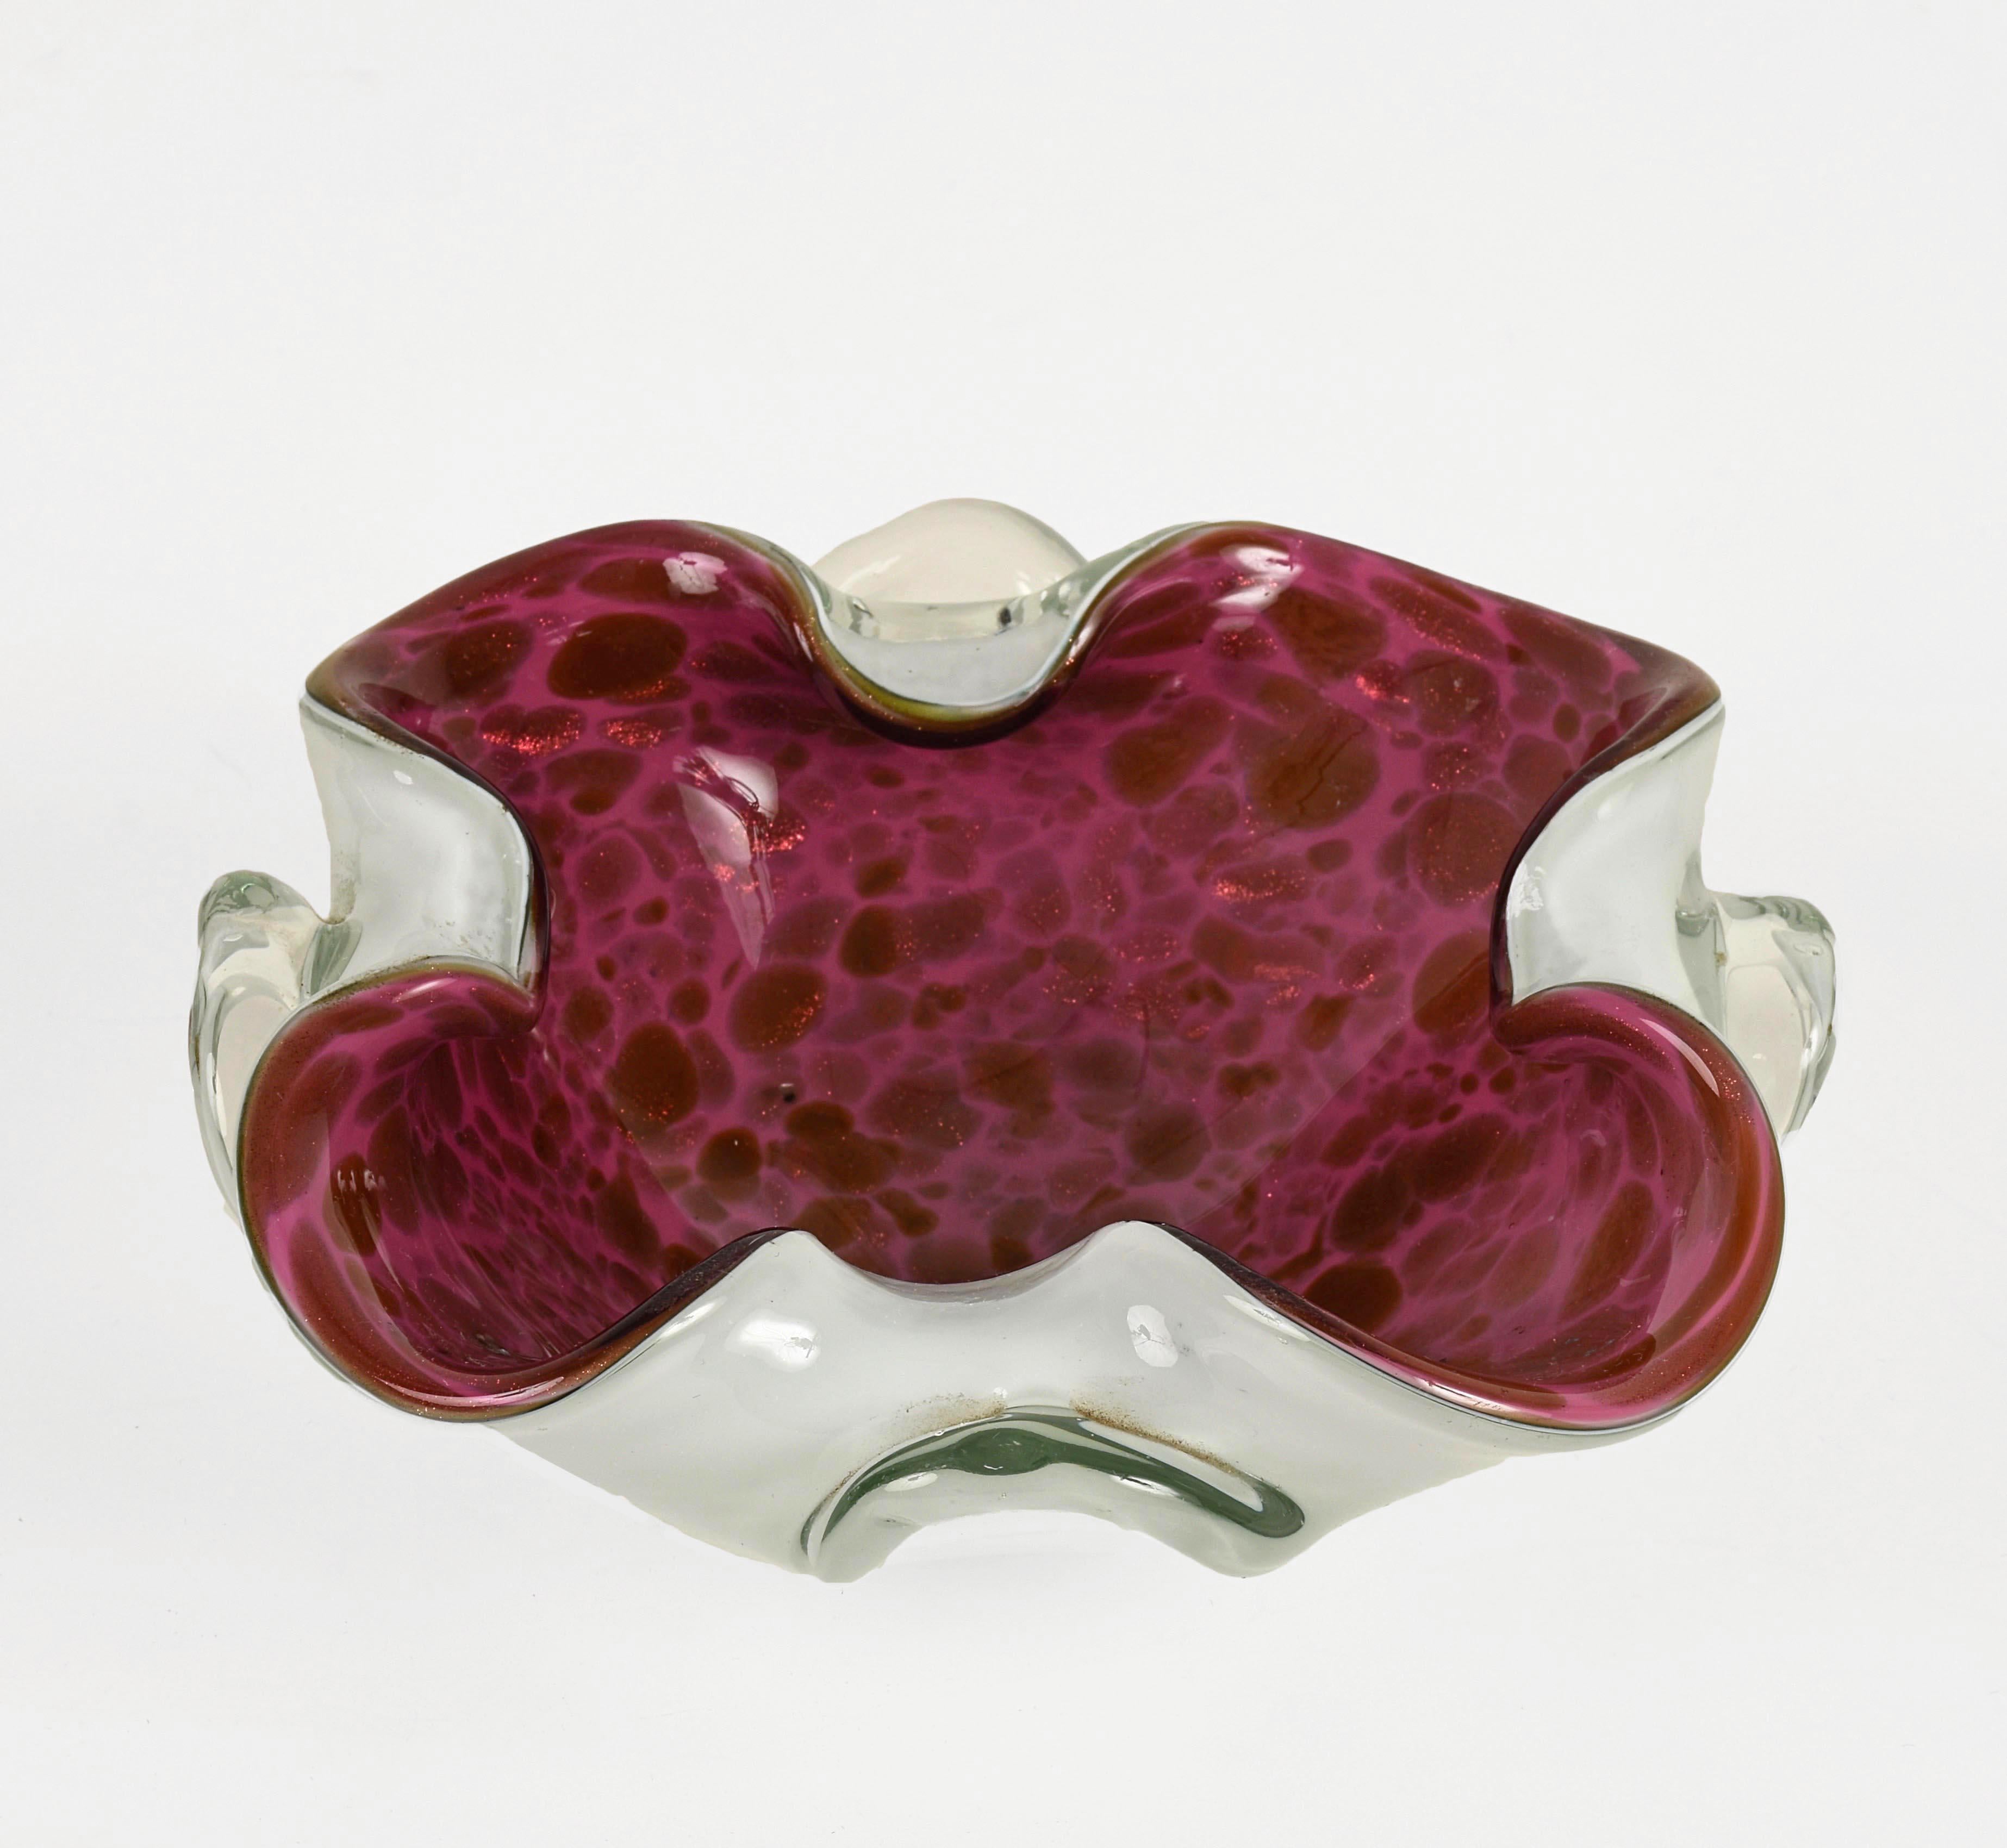 Amazing midcentury pink Murano glass with white copper flecks bowl. This wonderful piece is attributed to Fratelli Toso and produced in Italy during 1960s.

This piece is an astonishing hand blown pink, purple and white Murano glass with copper